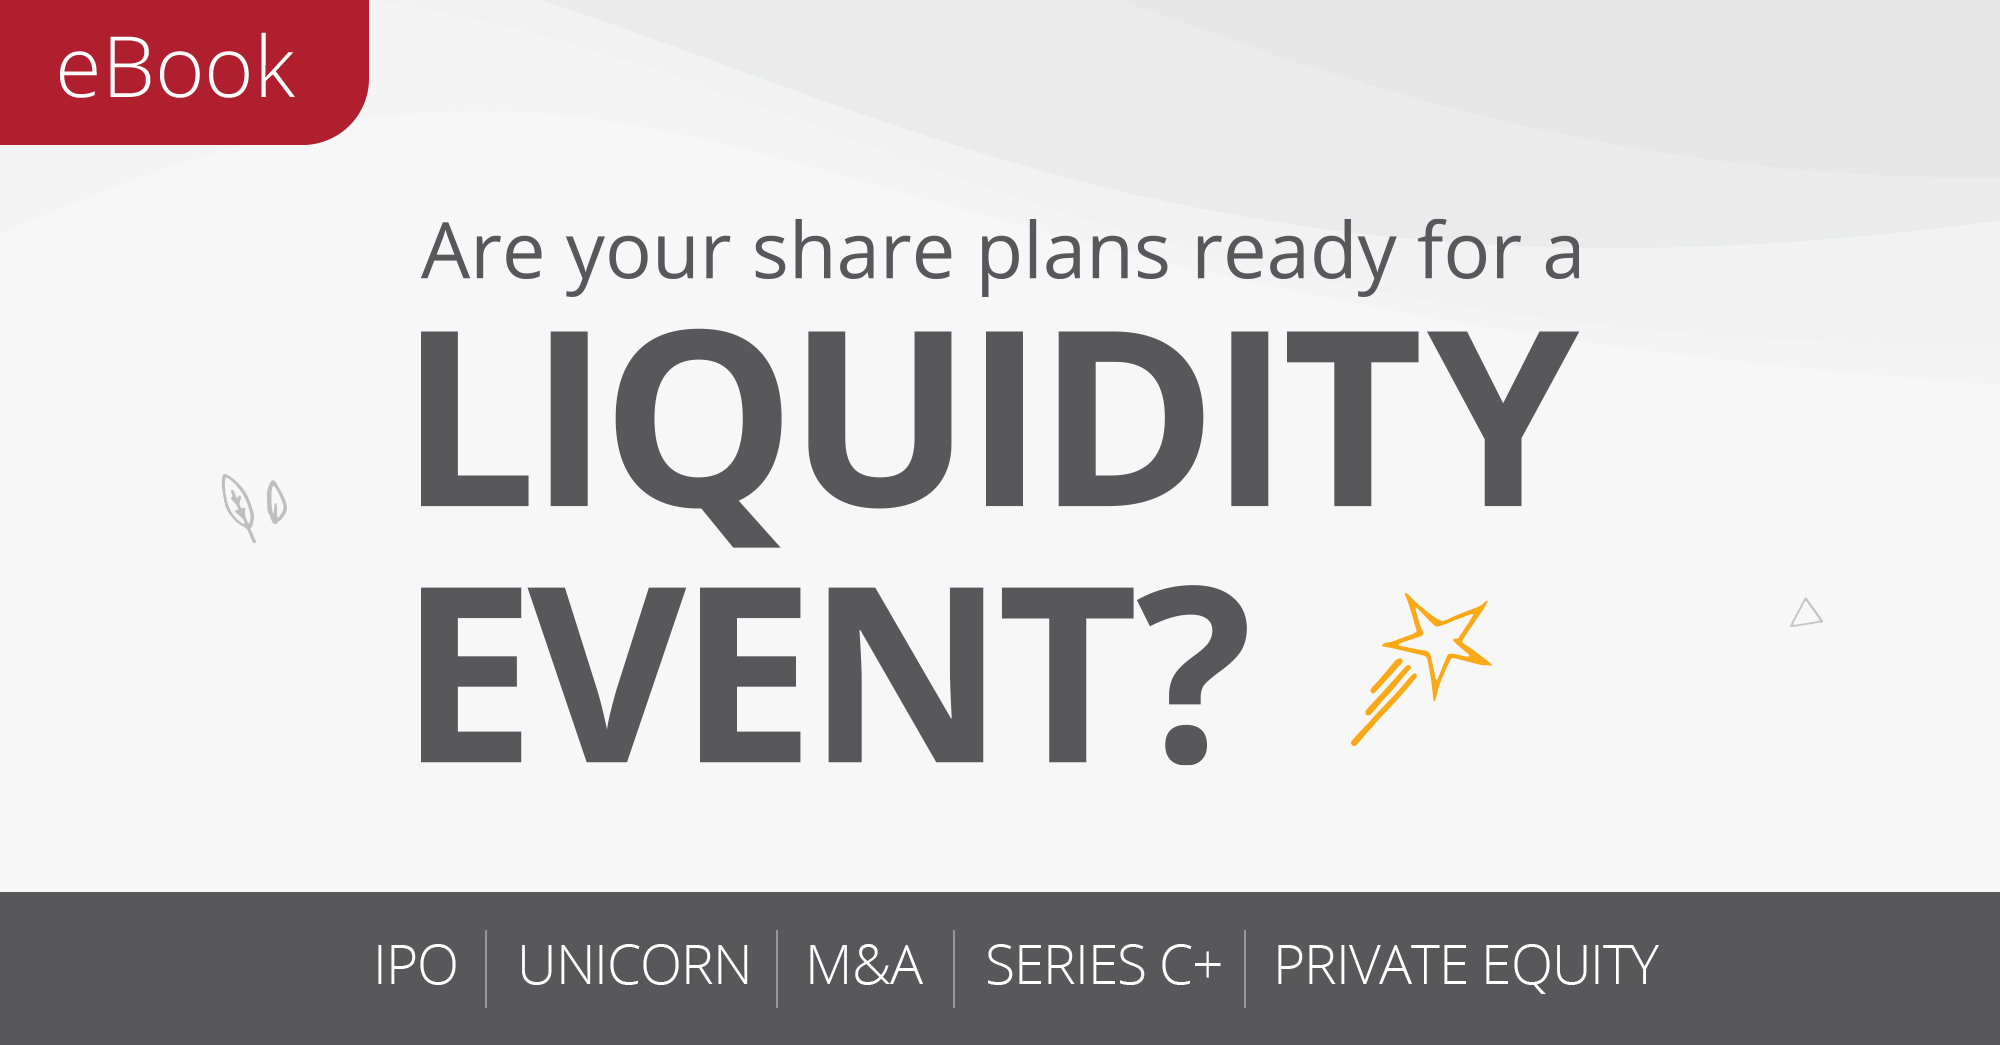 Free eBook: Are your share plans ready for a liquidity event?